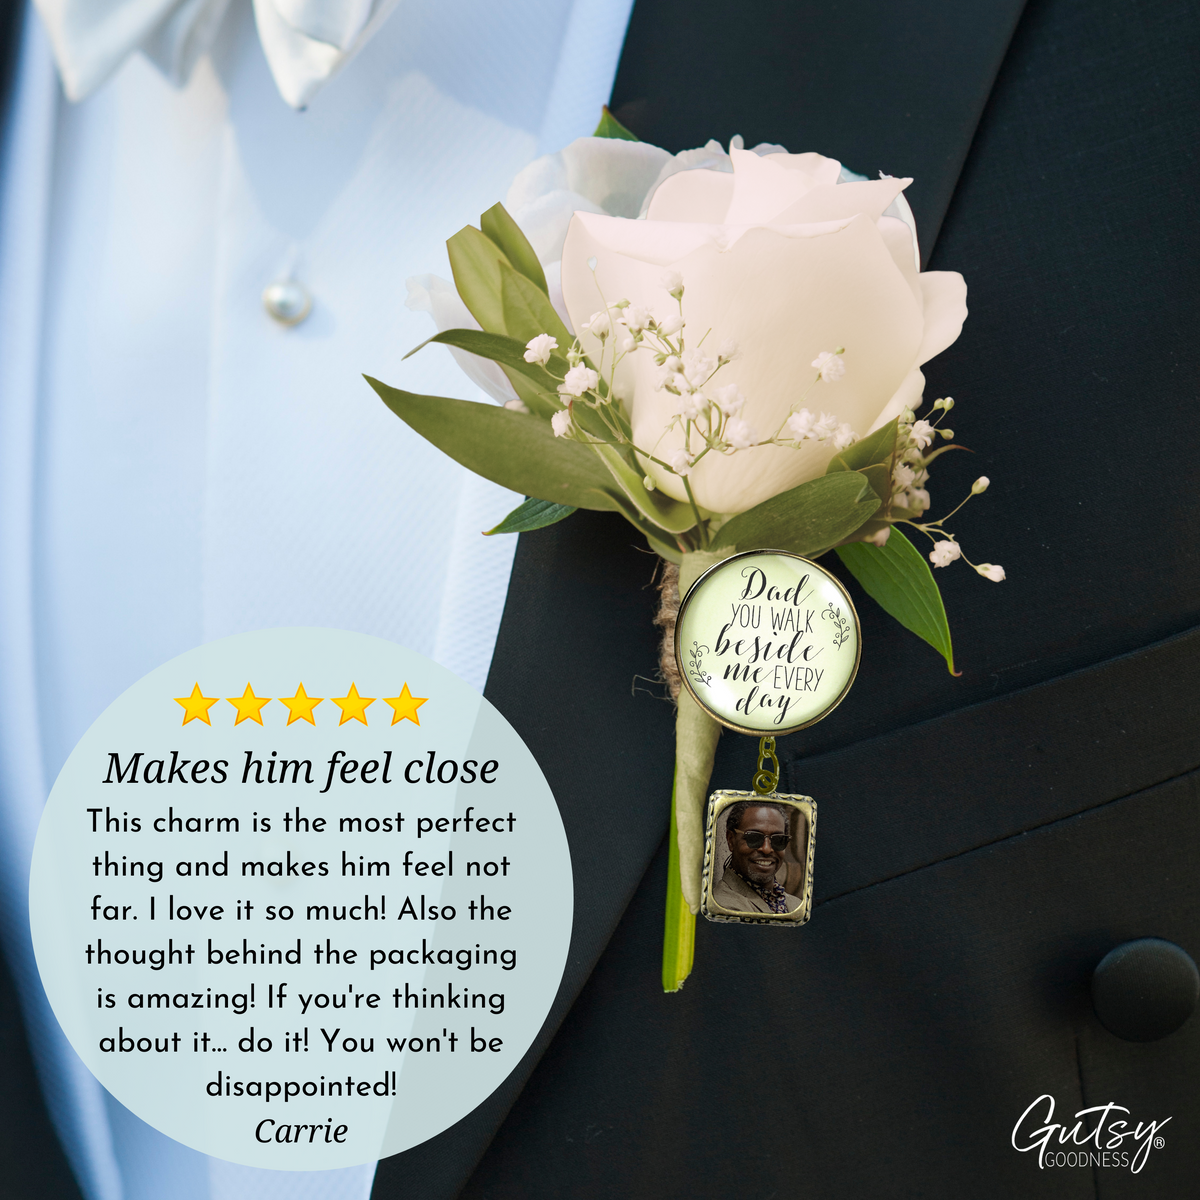 Wedding Memorial Boutonniere Pin Photo Frame Honor Father Dad Vintage Cream For Men - Gutsy Goodness